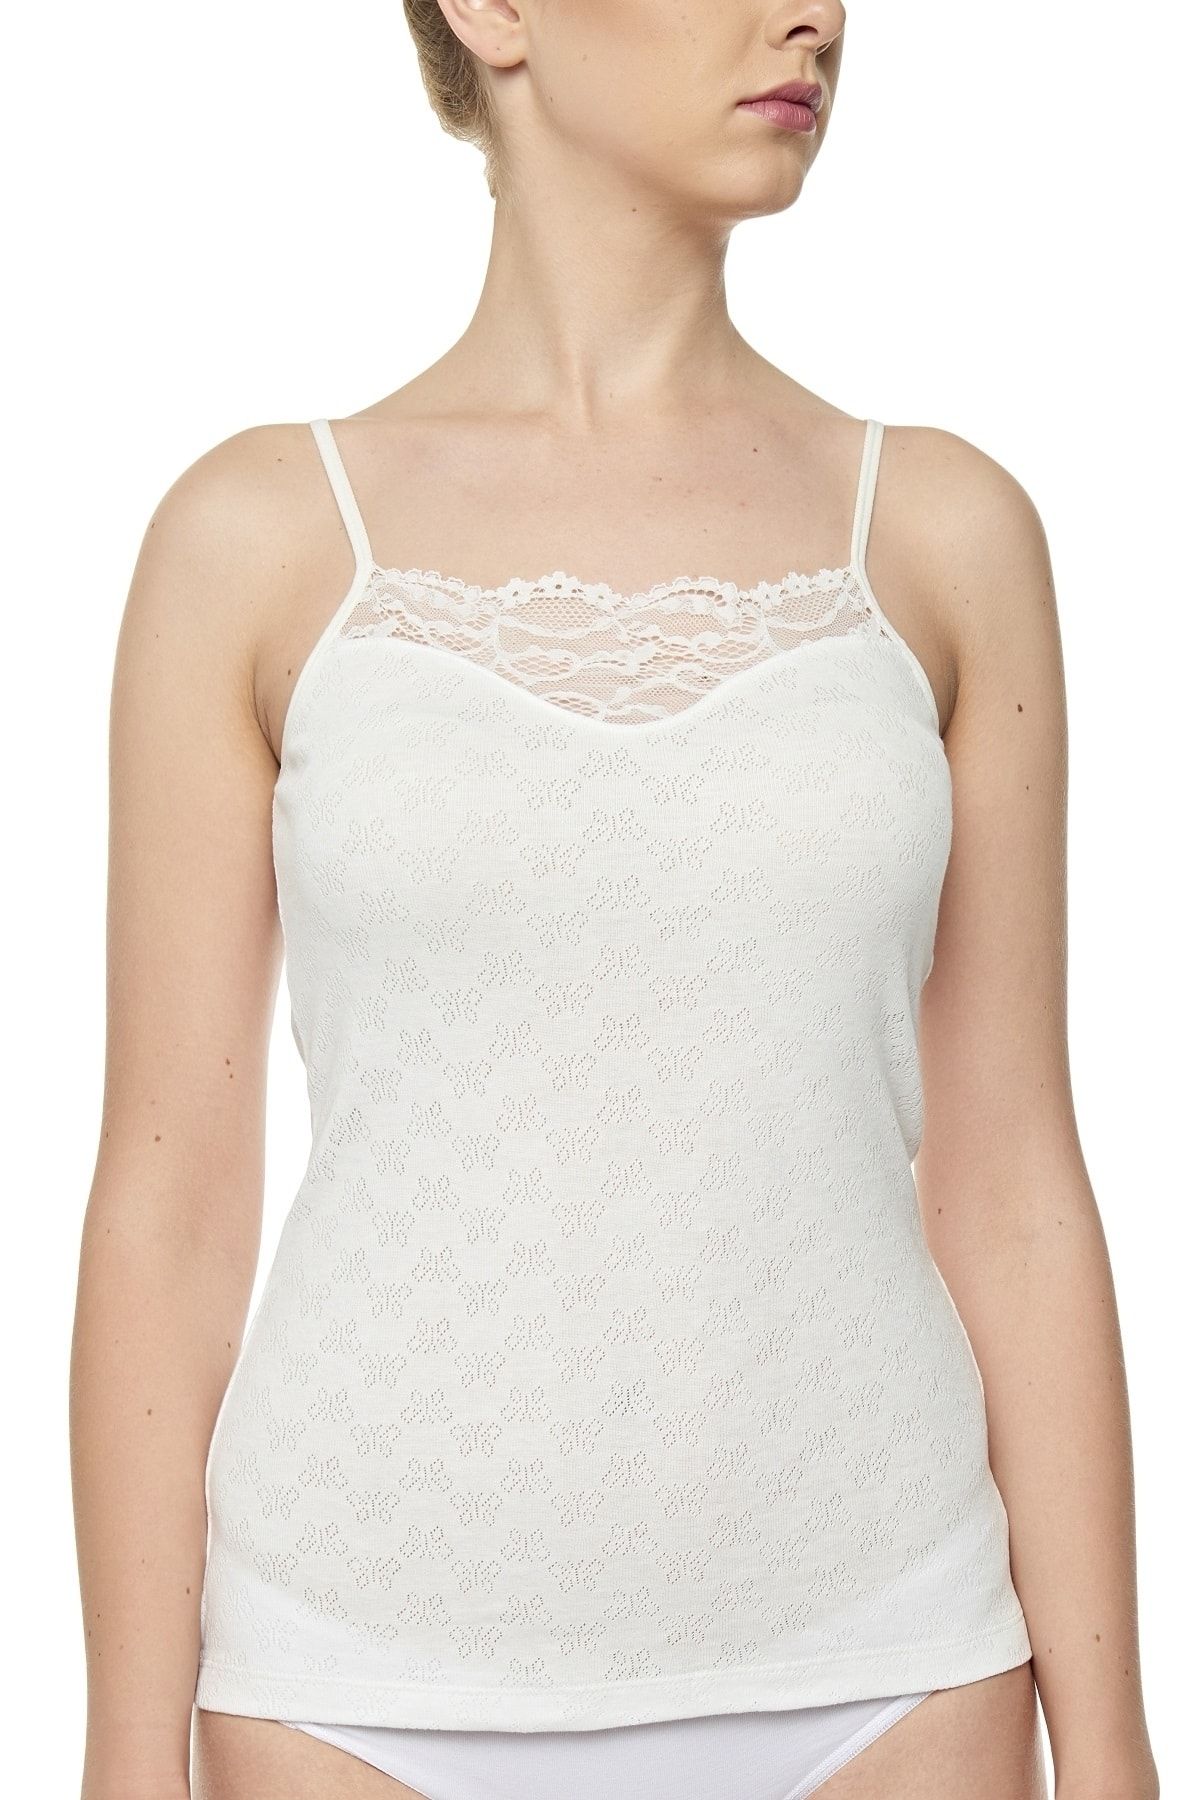 Women's Camisoles with Lace, Cotton & Nylon